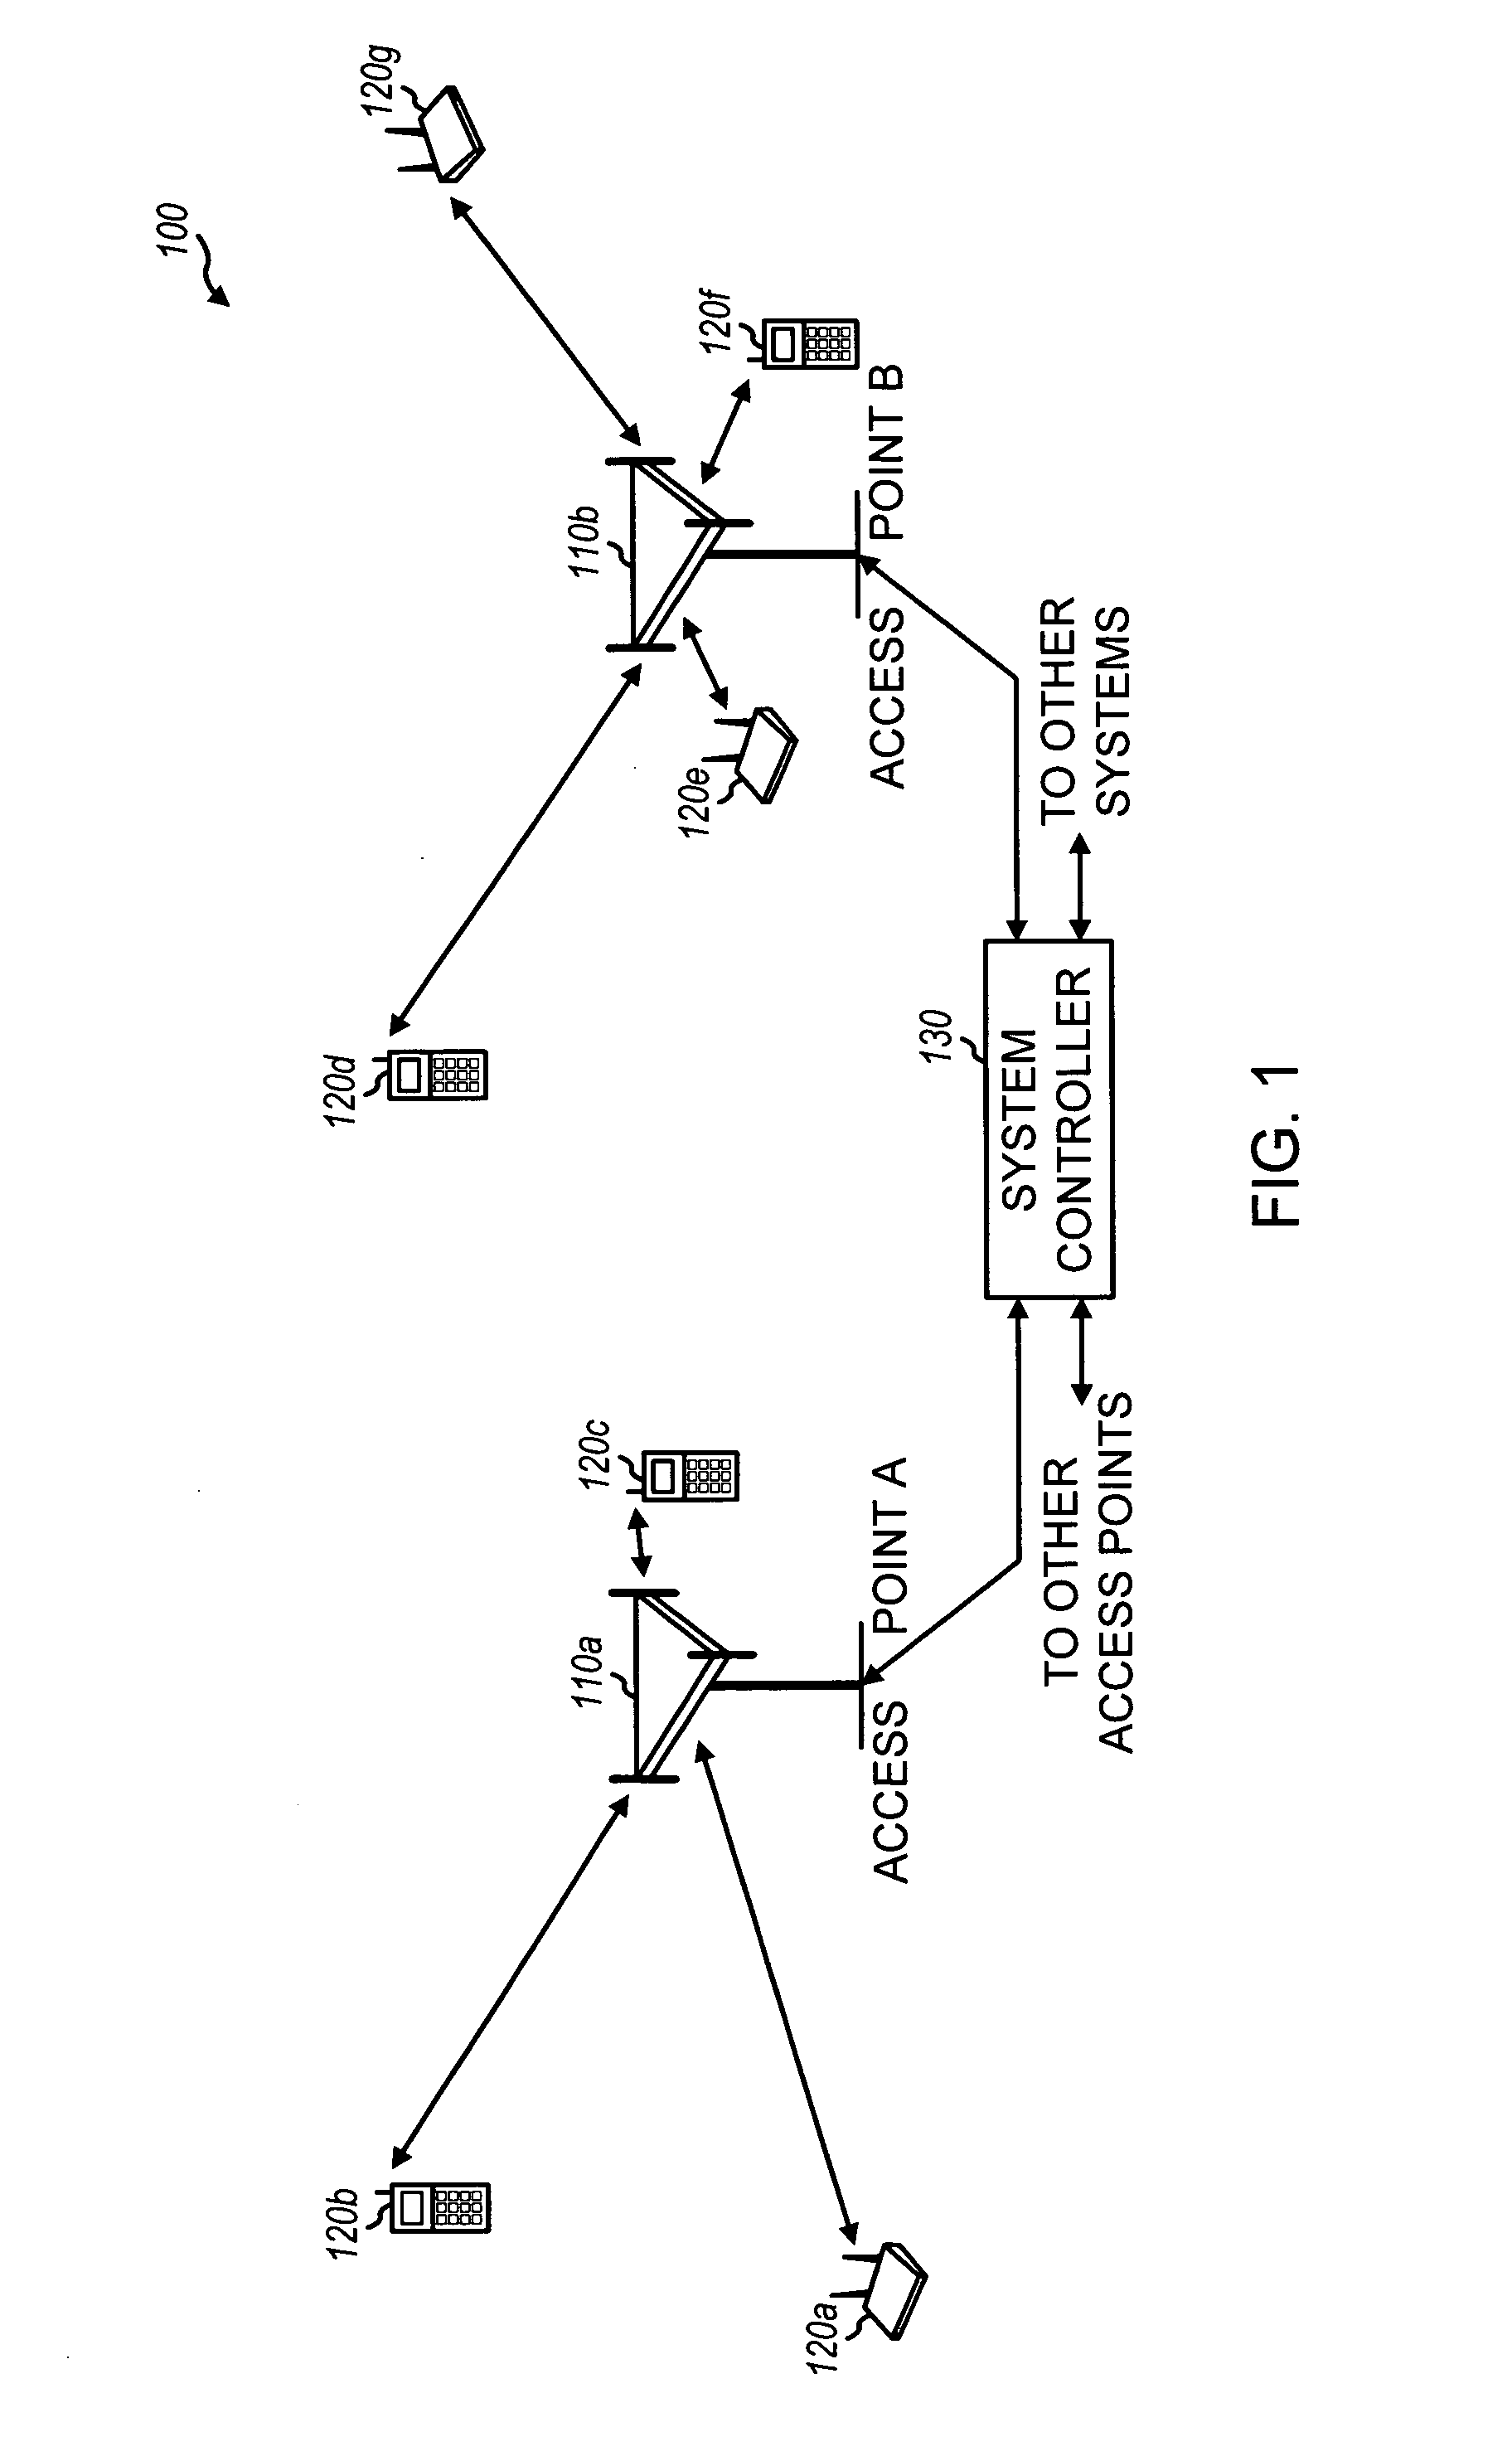 Method of providing a gap indication during a sticky assignment